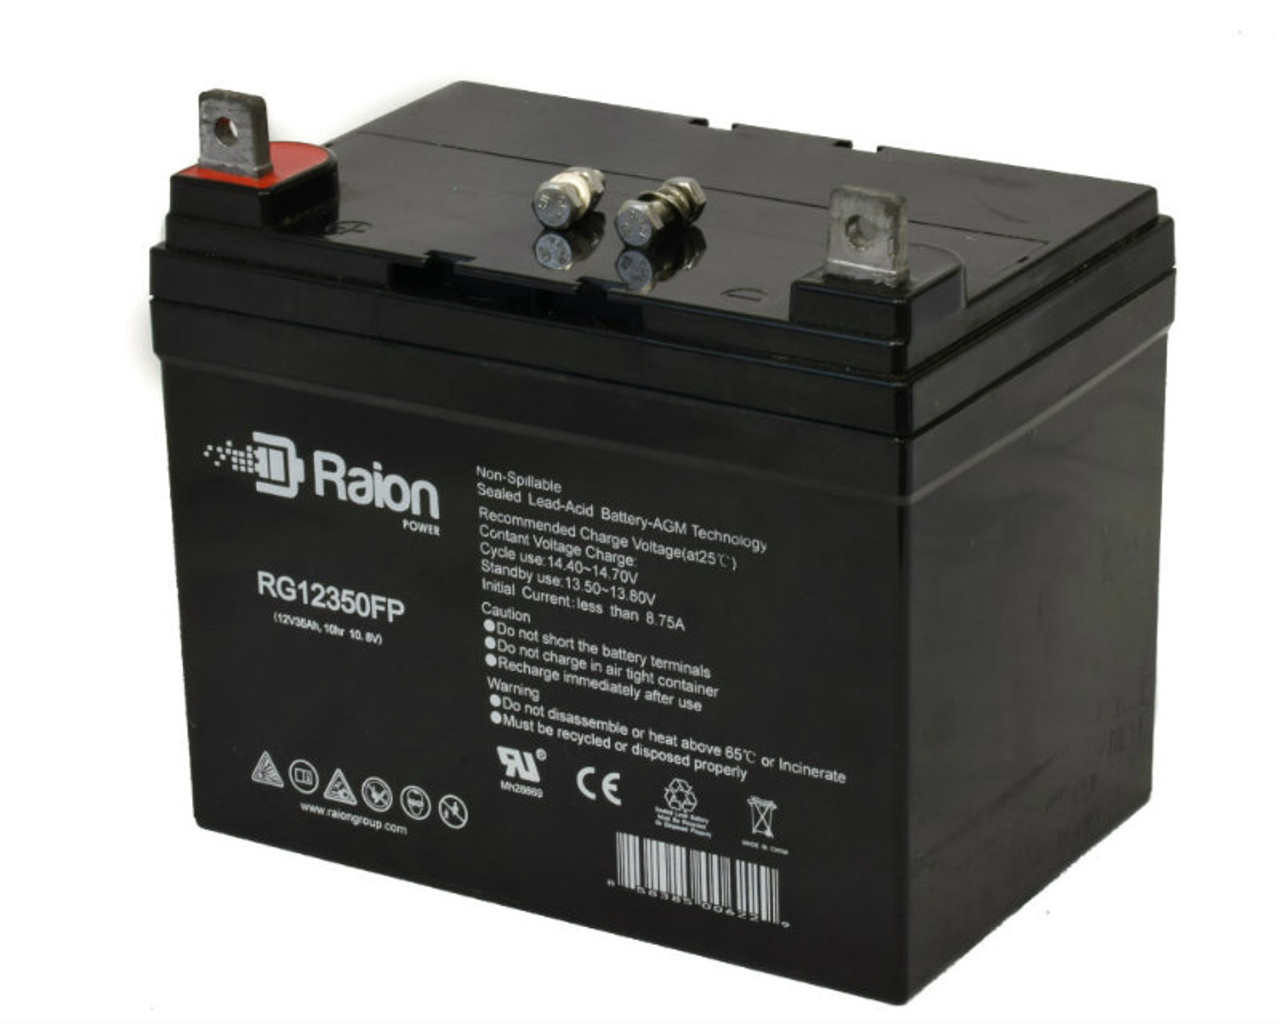 Raion Power Replacement 12V 35Ah RG12350FP Battery for Ingersoll Equipment 4016